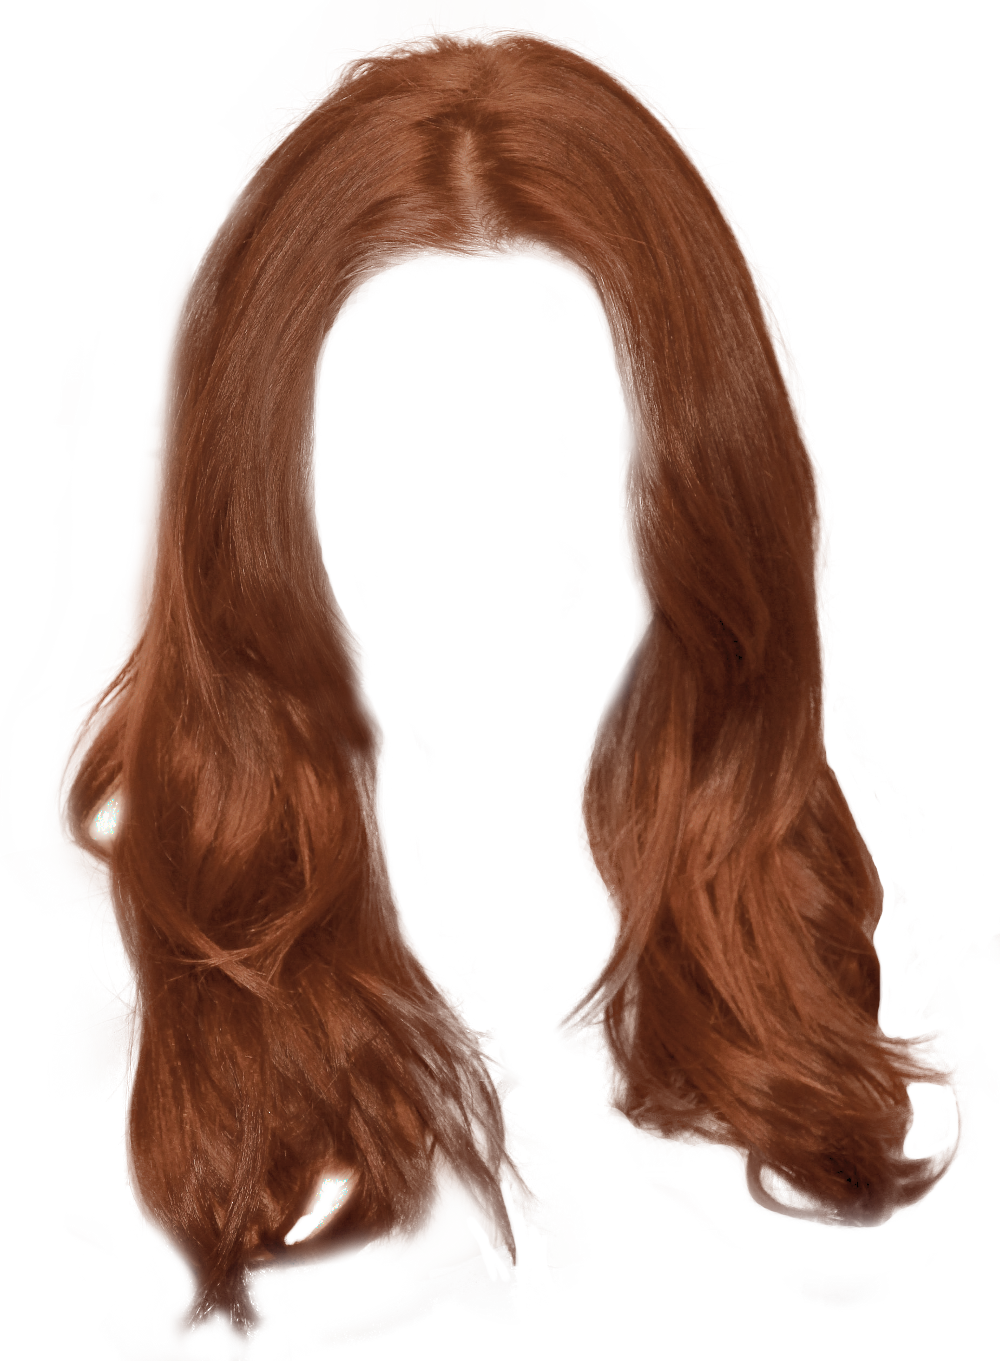 Hair Style Images, Hair Style Transparent PNG, Free download